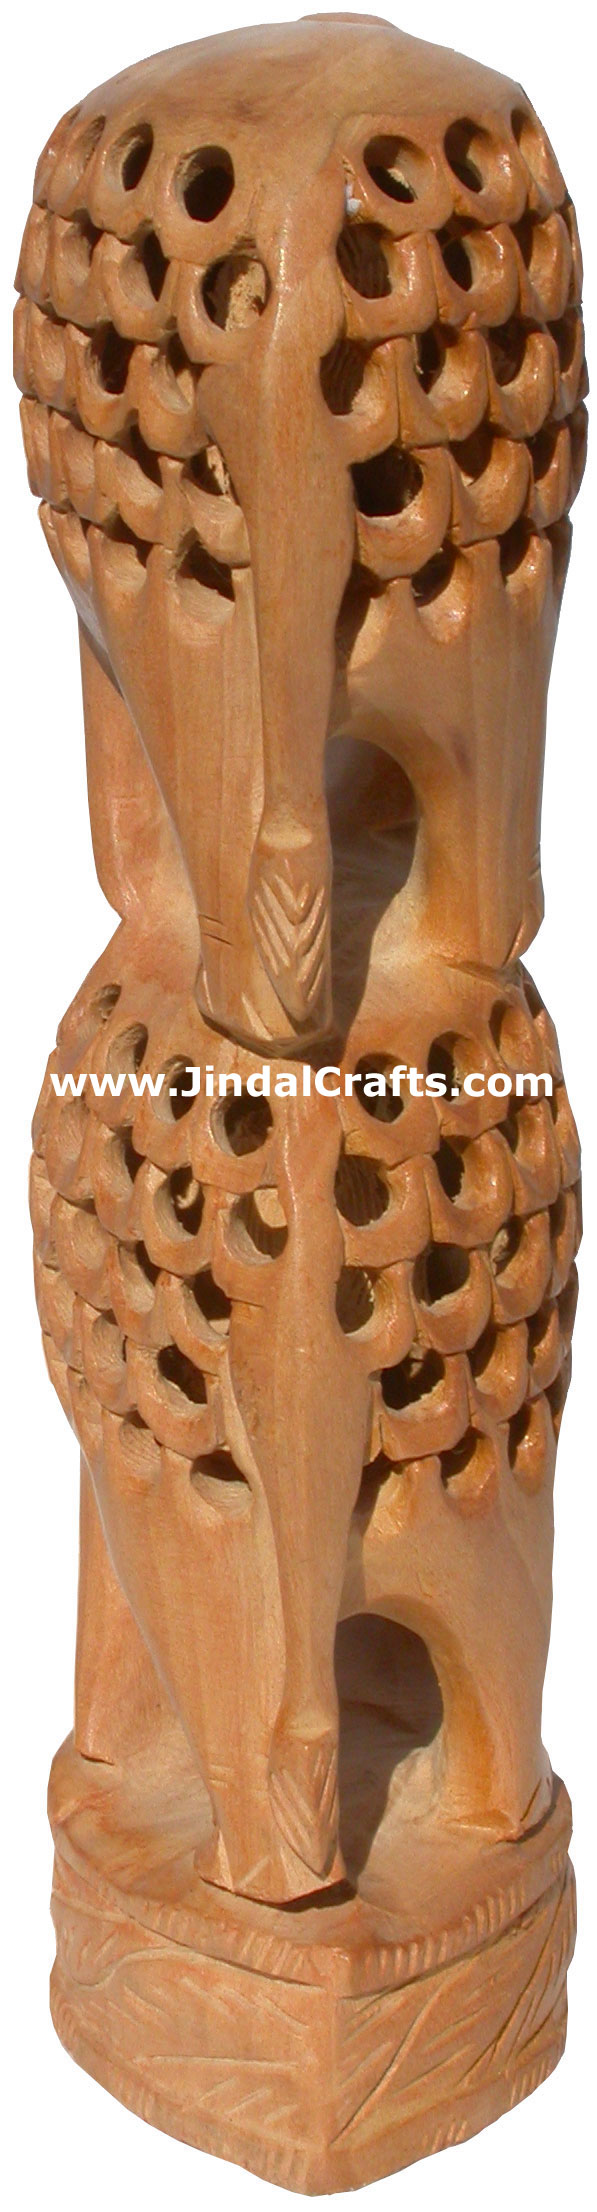 Hand Carved Wooden Elephant Tower India Artifacts Arts